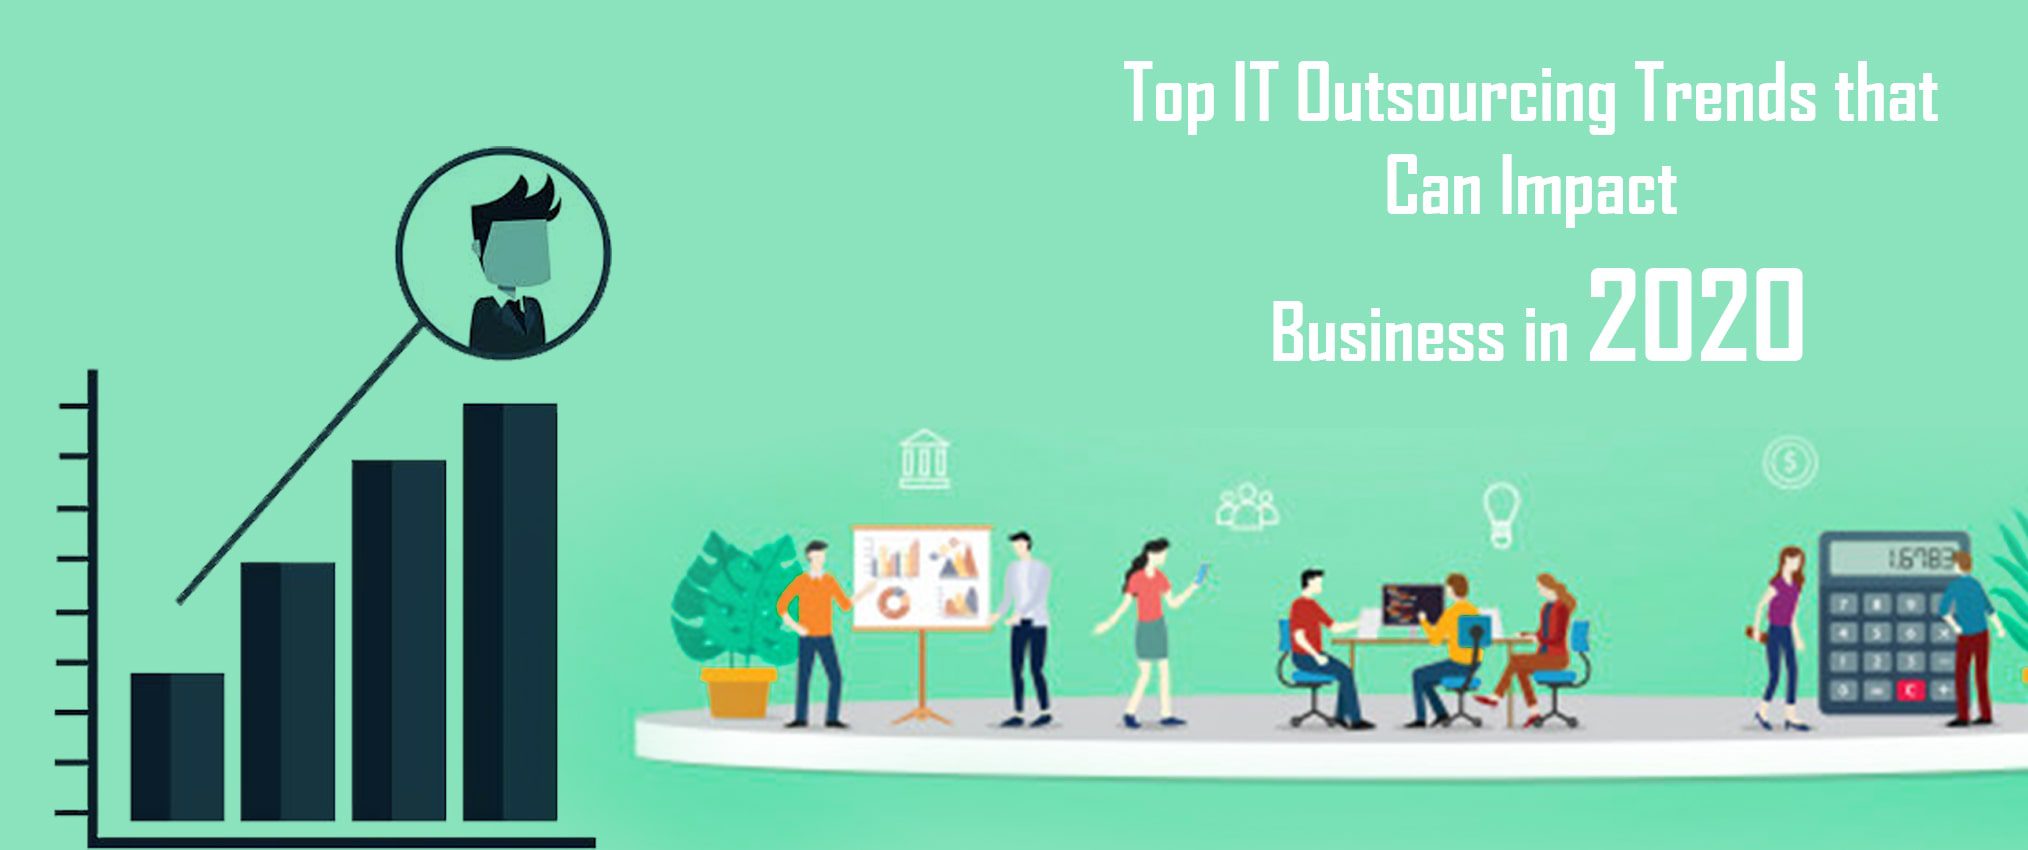 IT Outsourcing Trends